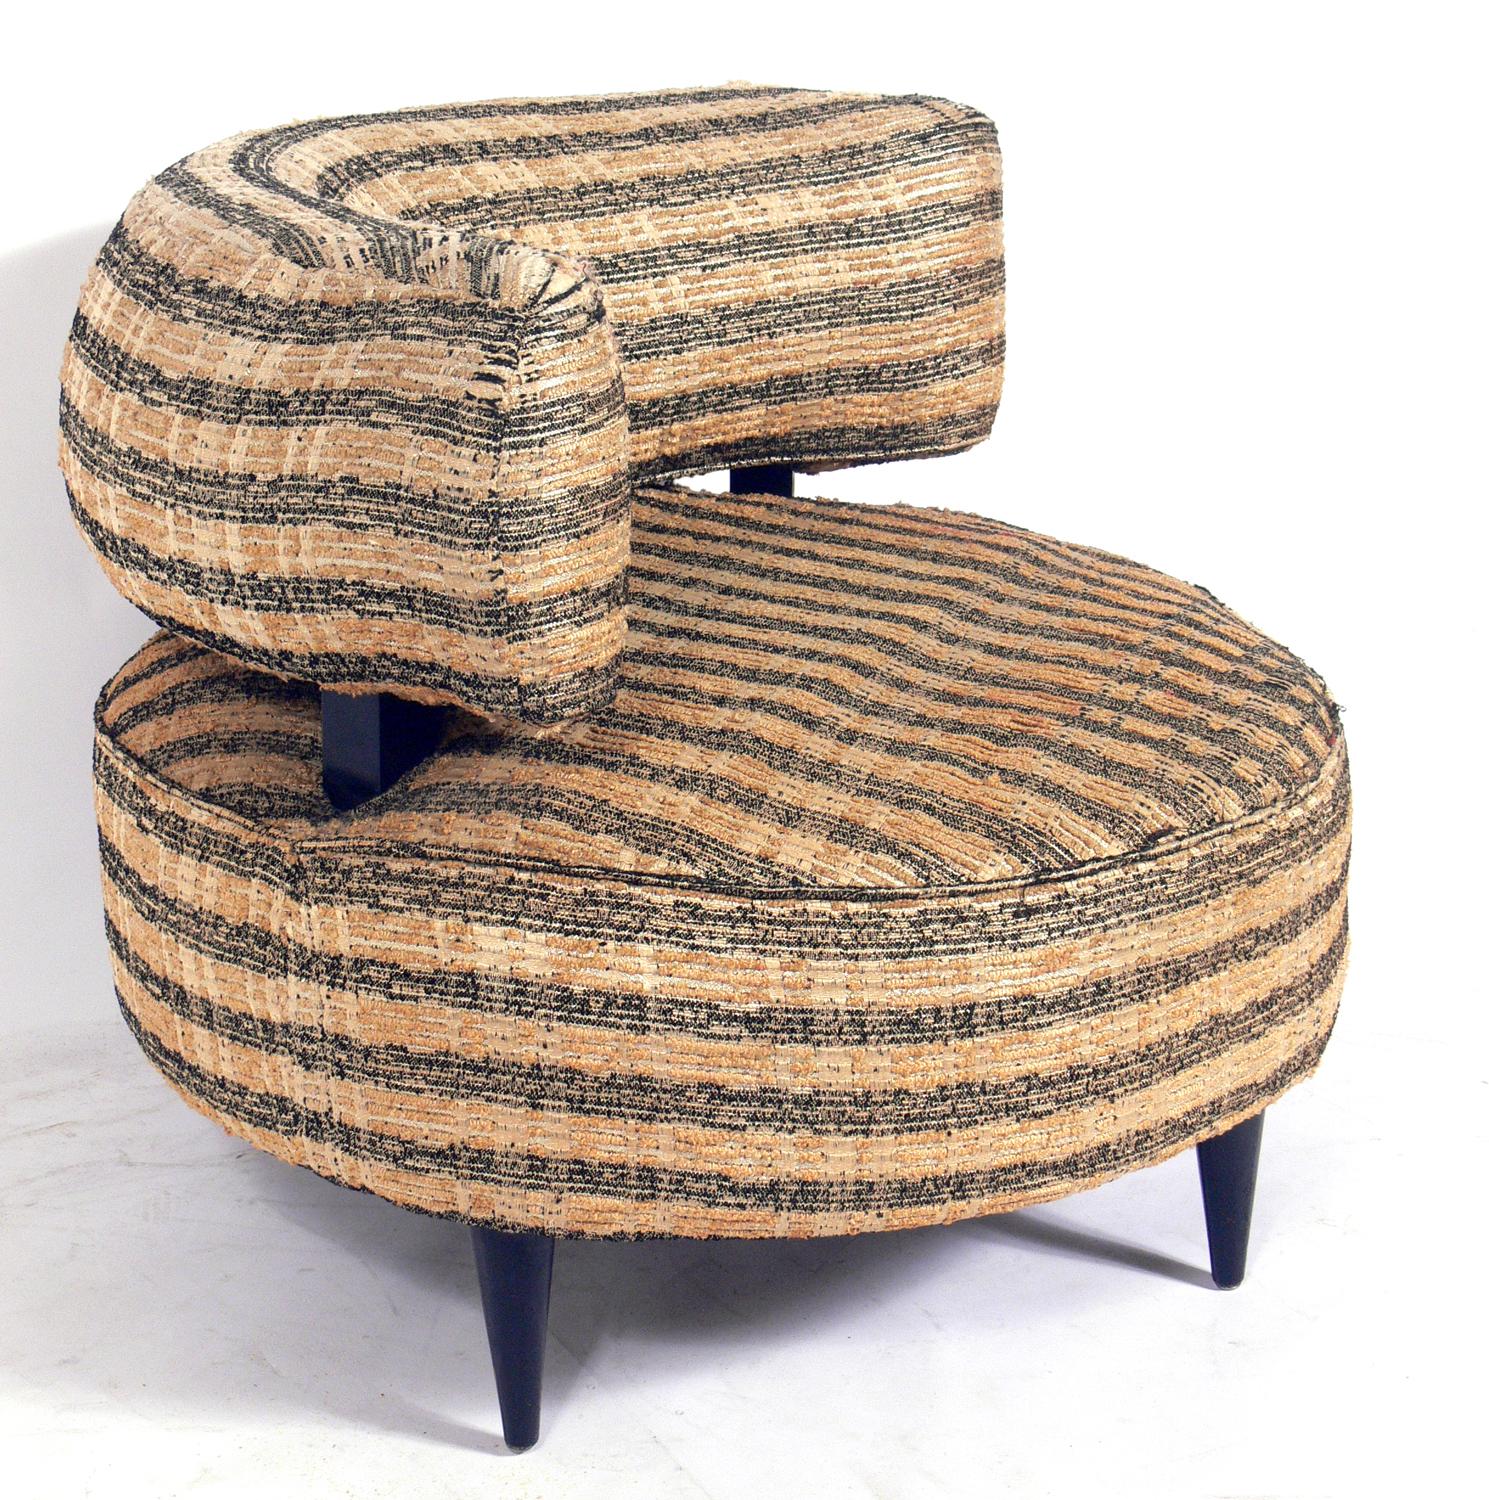 Curvaceous 1940s lounge chair, in the manner of Gilbert Rohde, American, circa 1940s. This piece is currently being reupholstered and refinished and can be completed in your choice of finish color and reupholstered in your fabric. The price noted